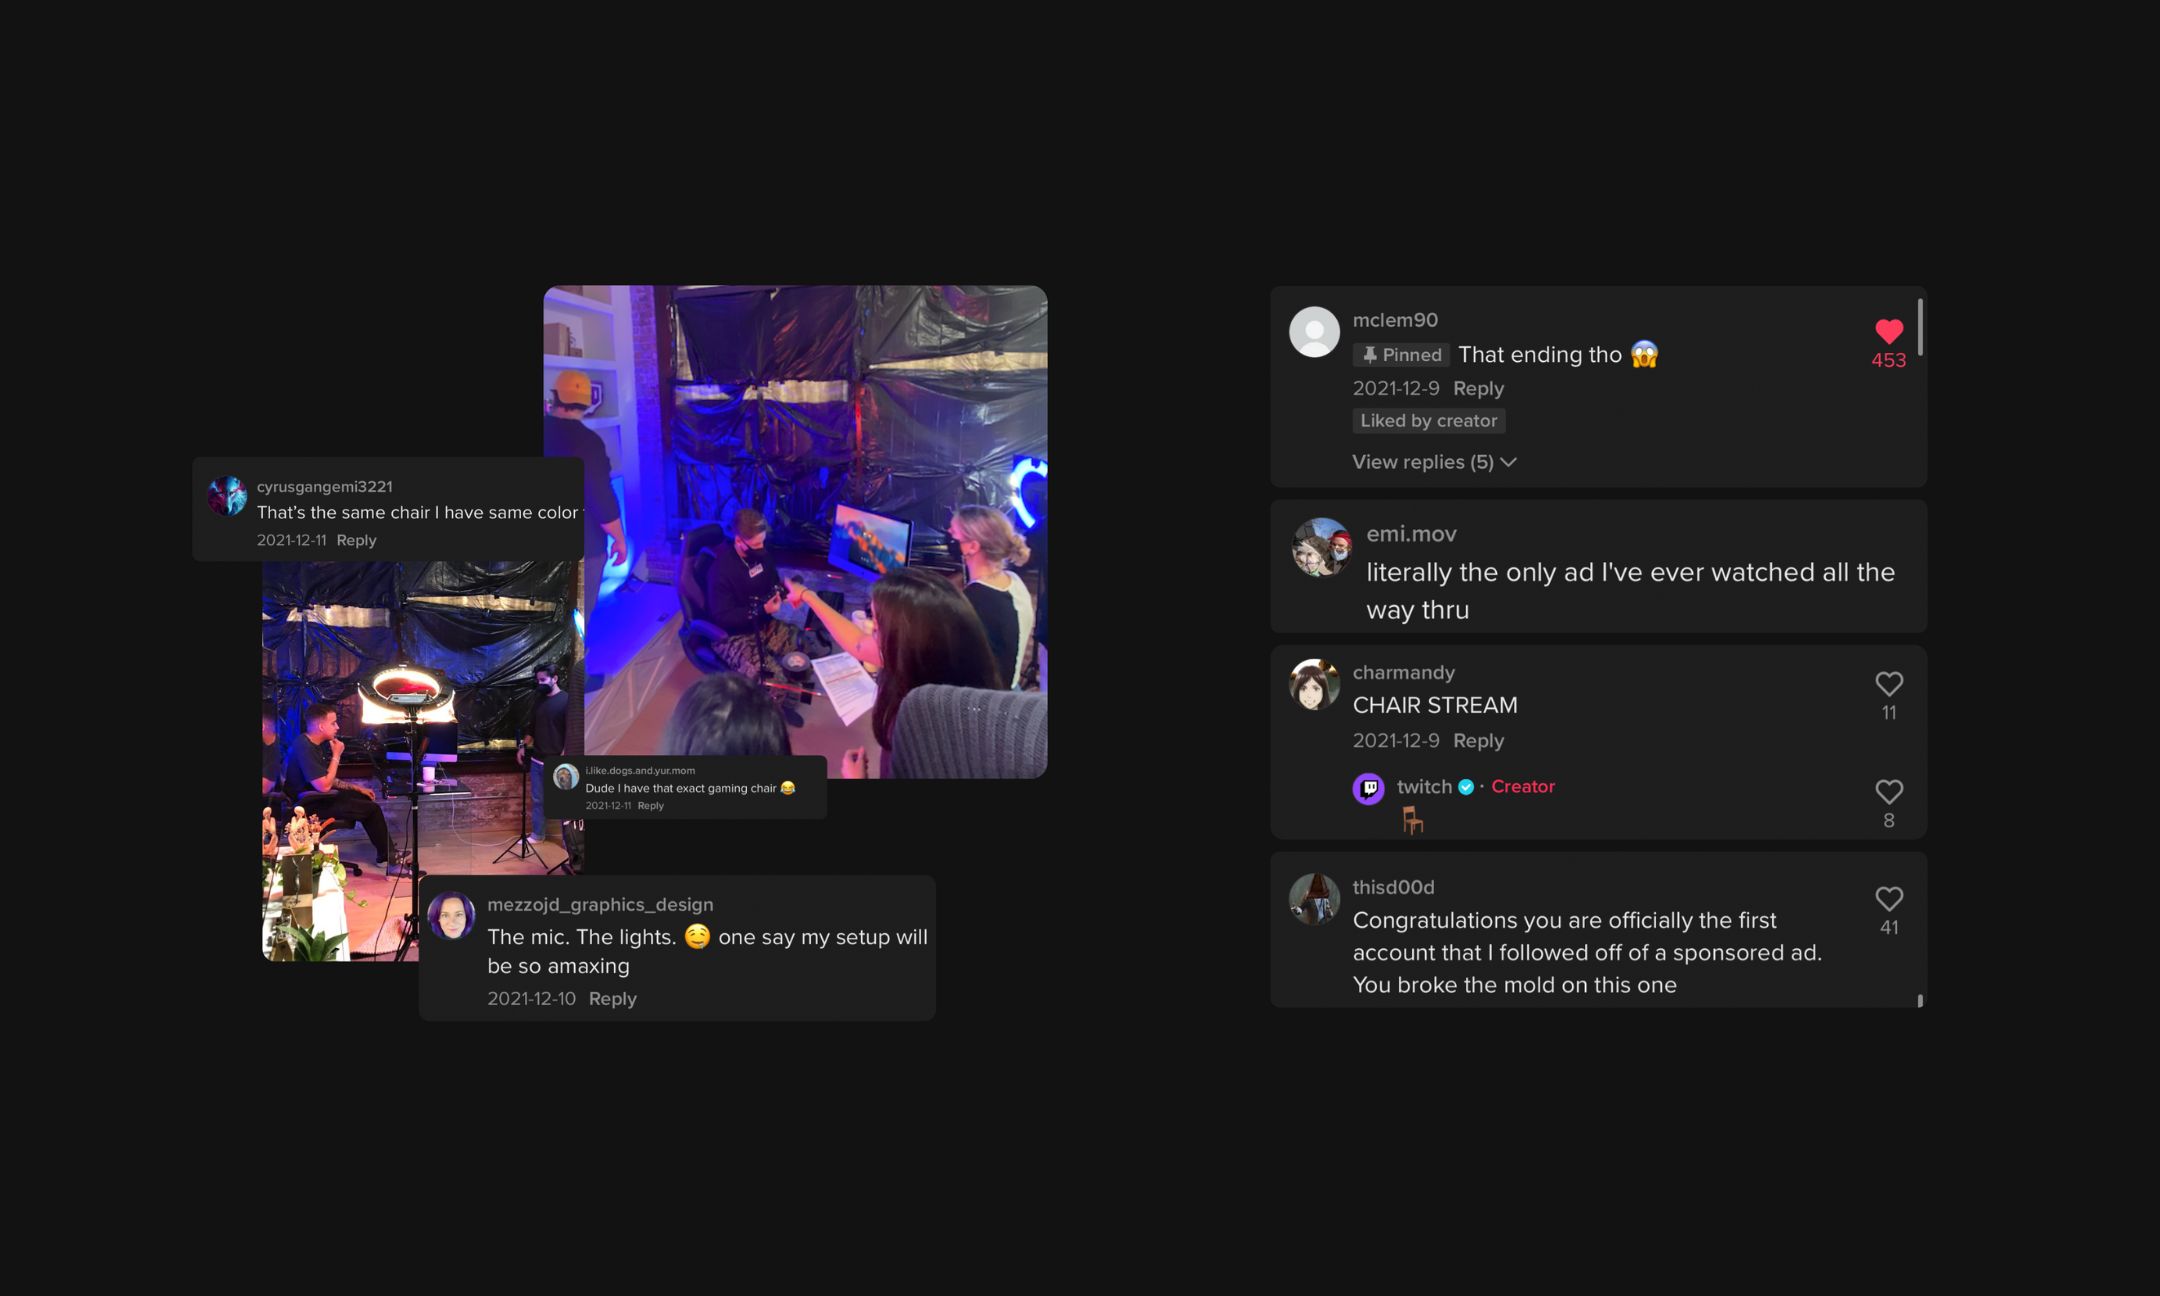 Gamers commented their love for our work with Twitch on their first TikTok.